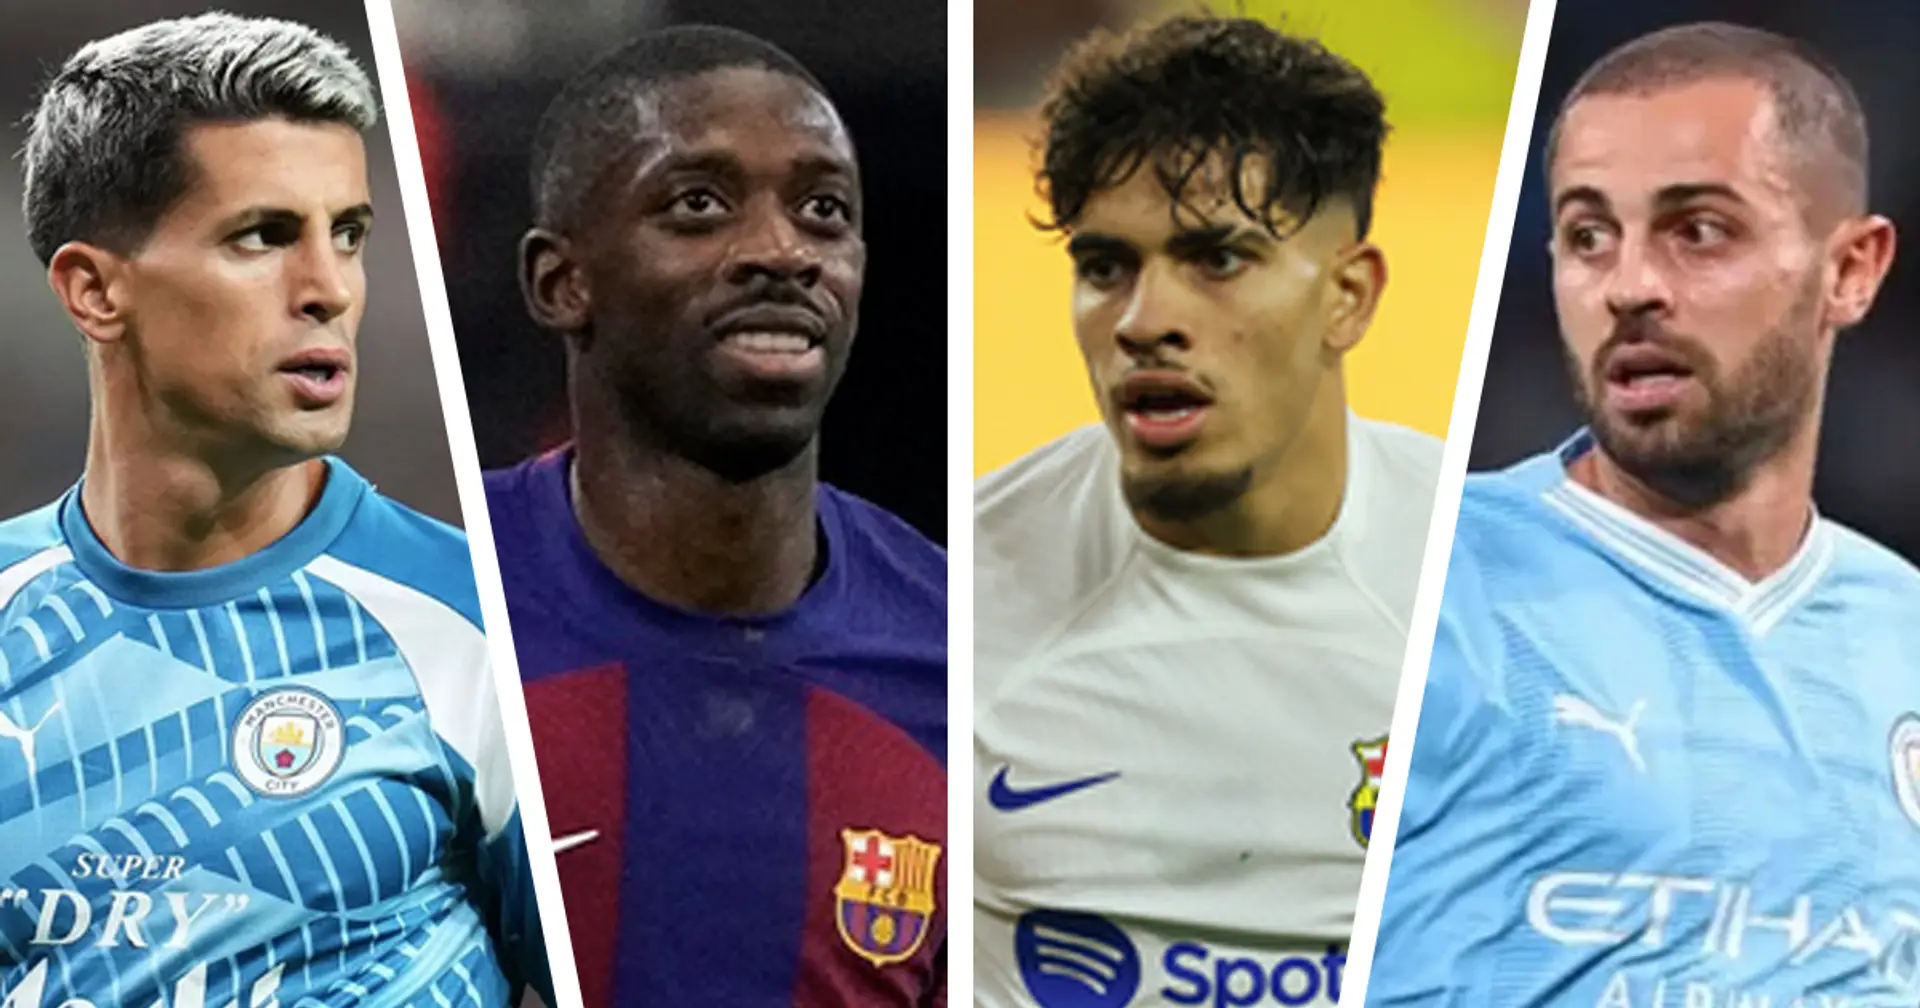 Bernardo Silva, Cancelo and 11 more names in Barca's transfer round-up with probability ratings